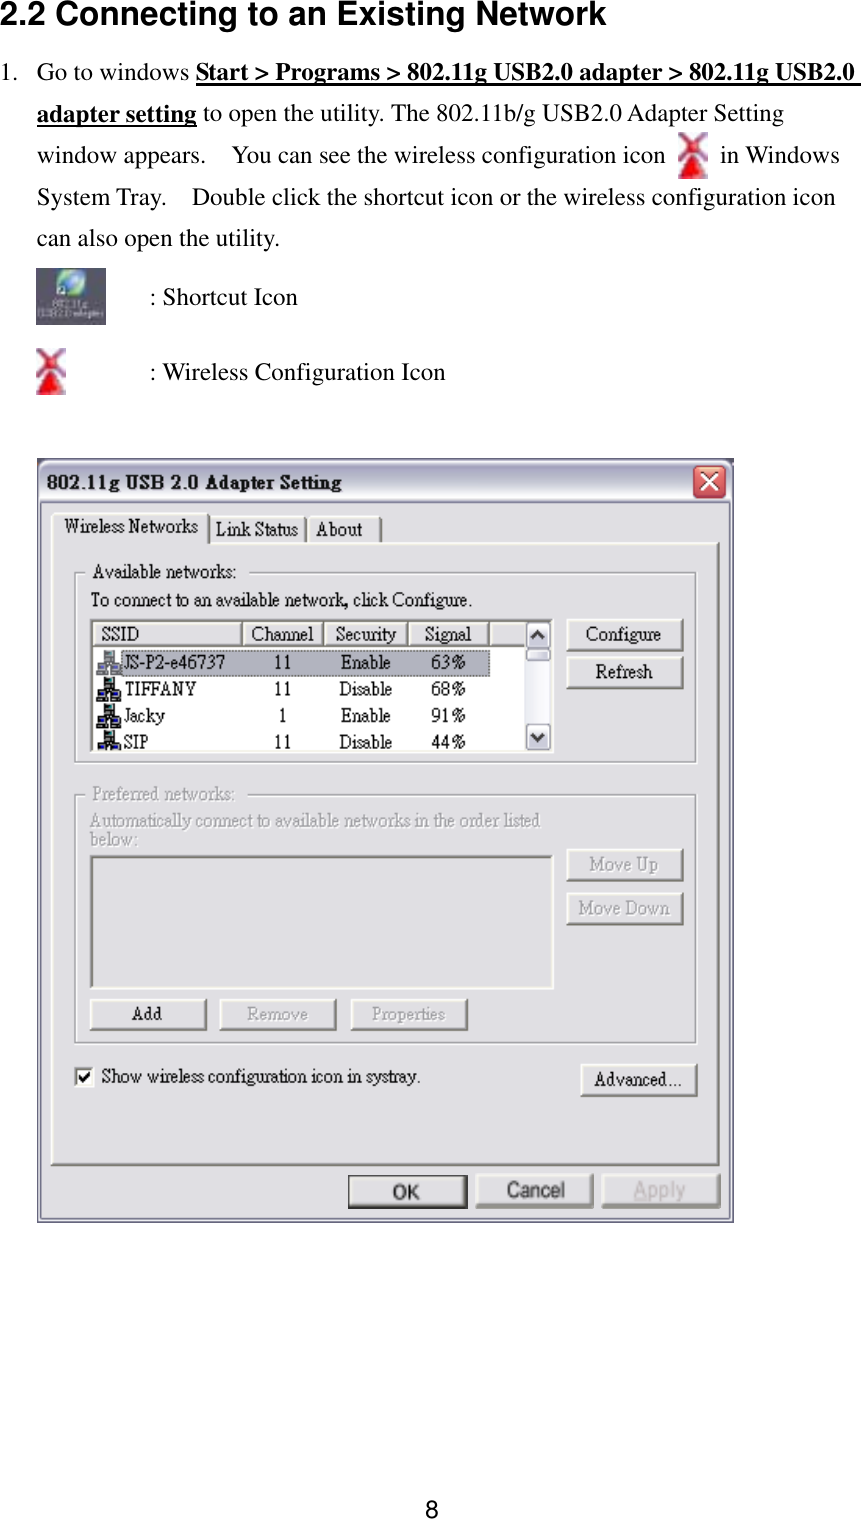  82.2 Connecting to an Existing Network 1.  Go to windows Start &gt; Programs &gt; 802.11g USB2.0 adapter &gt; 802.11g USB2.0 adapter setting to open the utility. The 802.11b/g USB2.0 Adapter Setting window appears.  You can see the wireless configuration icon   in Windows System Tray.  Double click the shortcut icon or the wireless configuration icon can also open the utility.     : Shortcut Icon     : Wireless Configuration Icon    